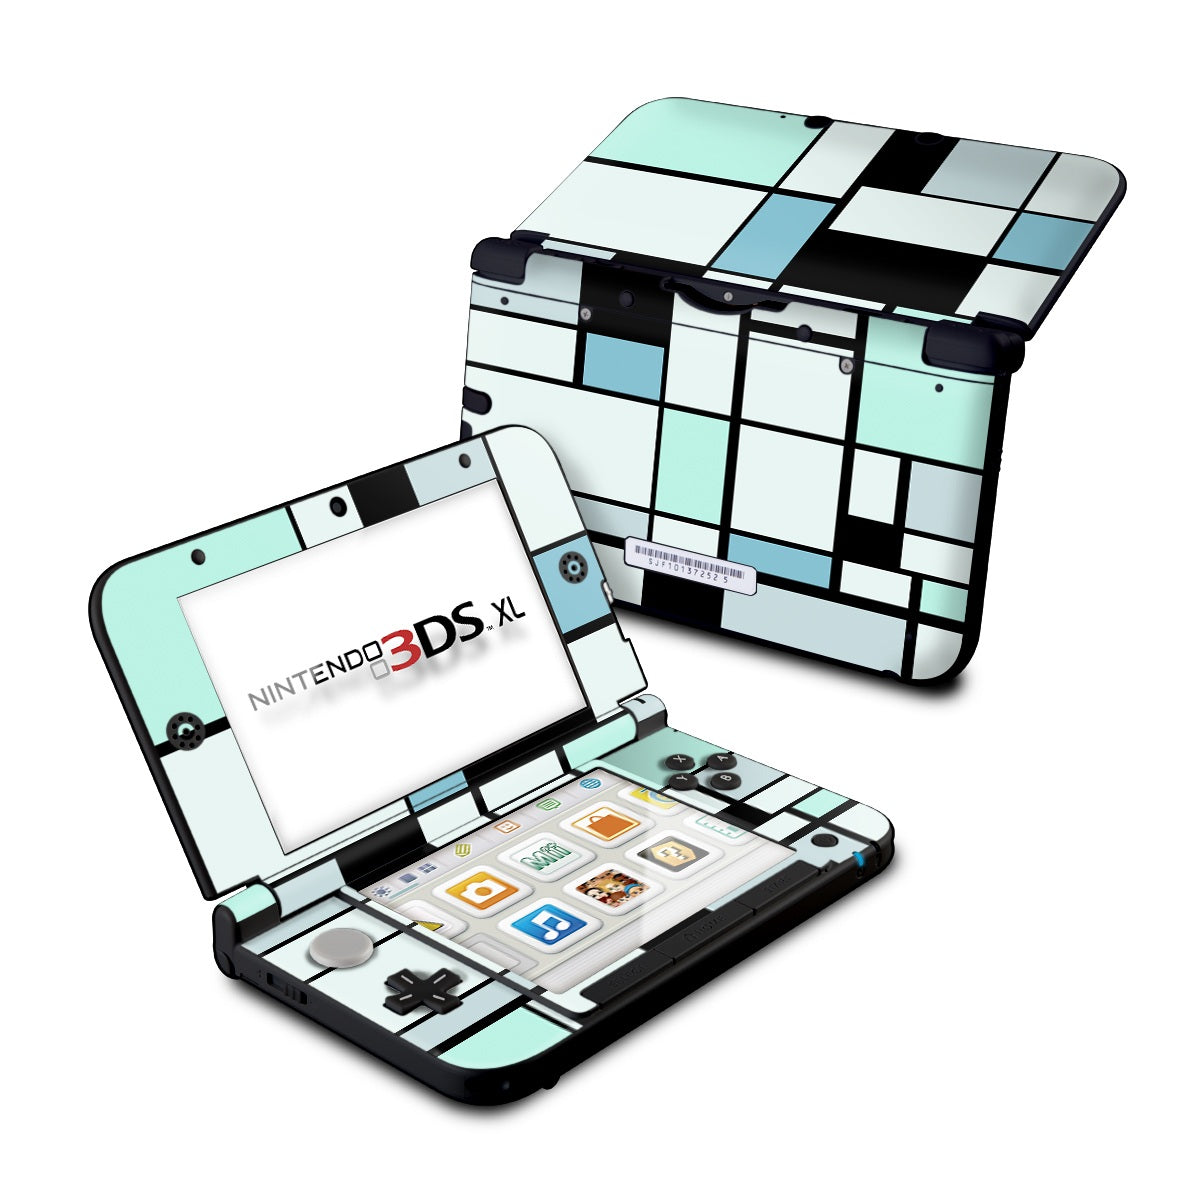 Cooled - Nintendo 3DS XL Skin